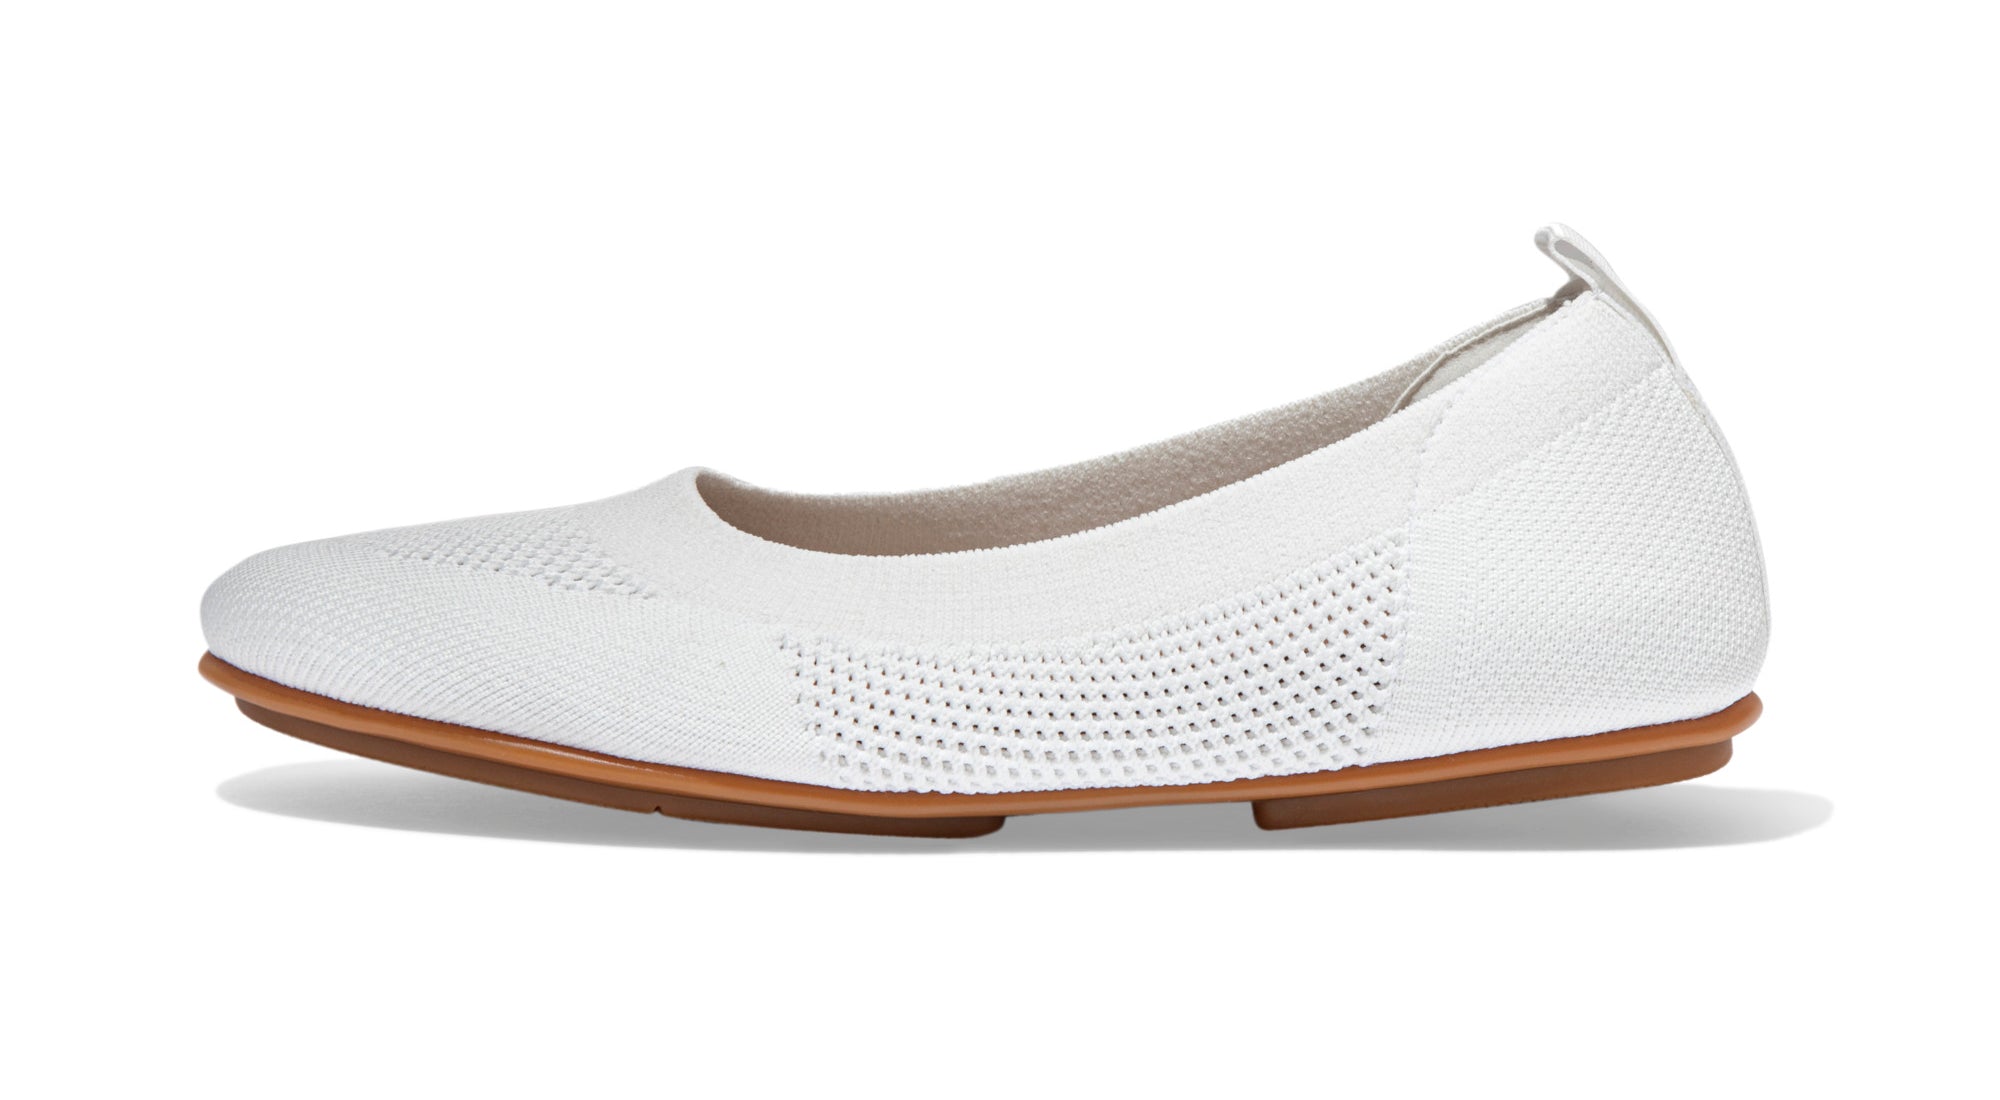 Women's FitFlop Allegro Tonal Knit Ballerinas Flat Shoe in Urban White from the side